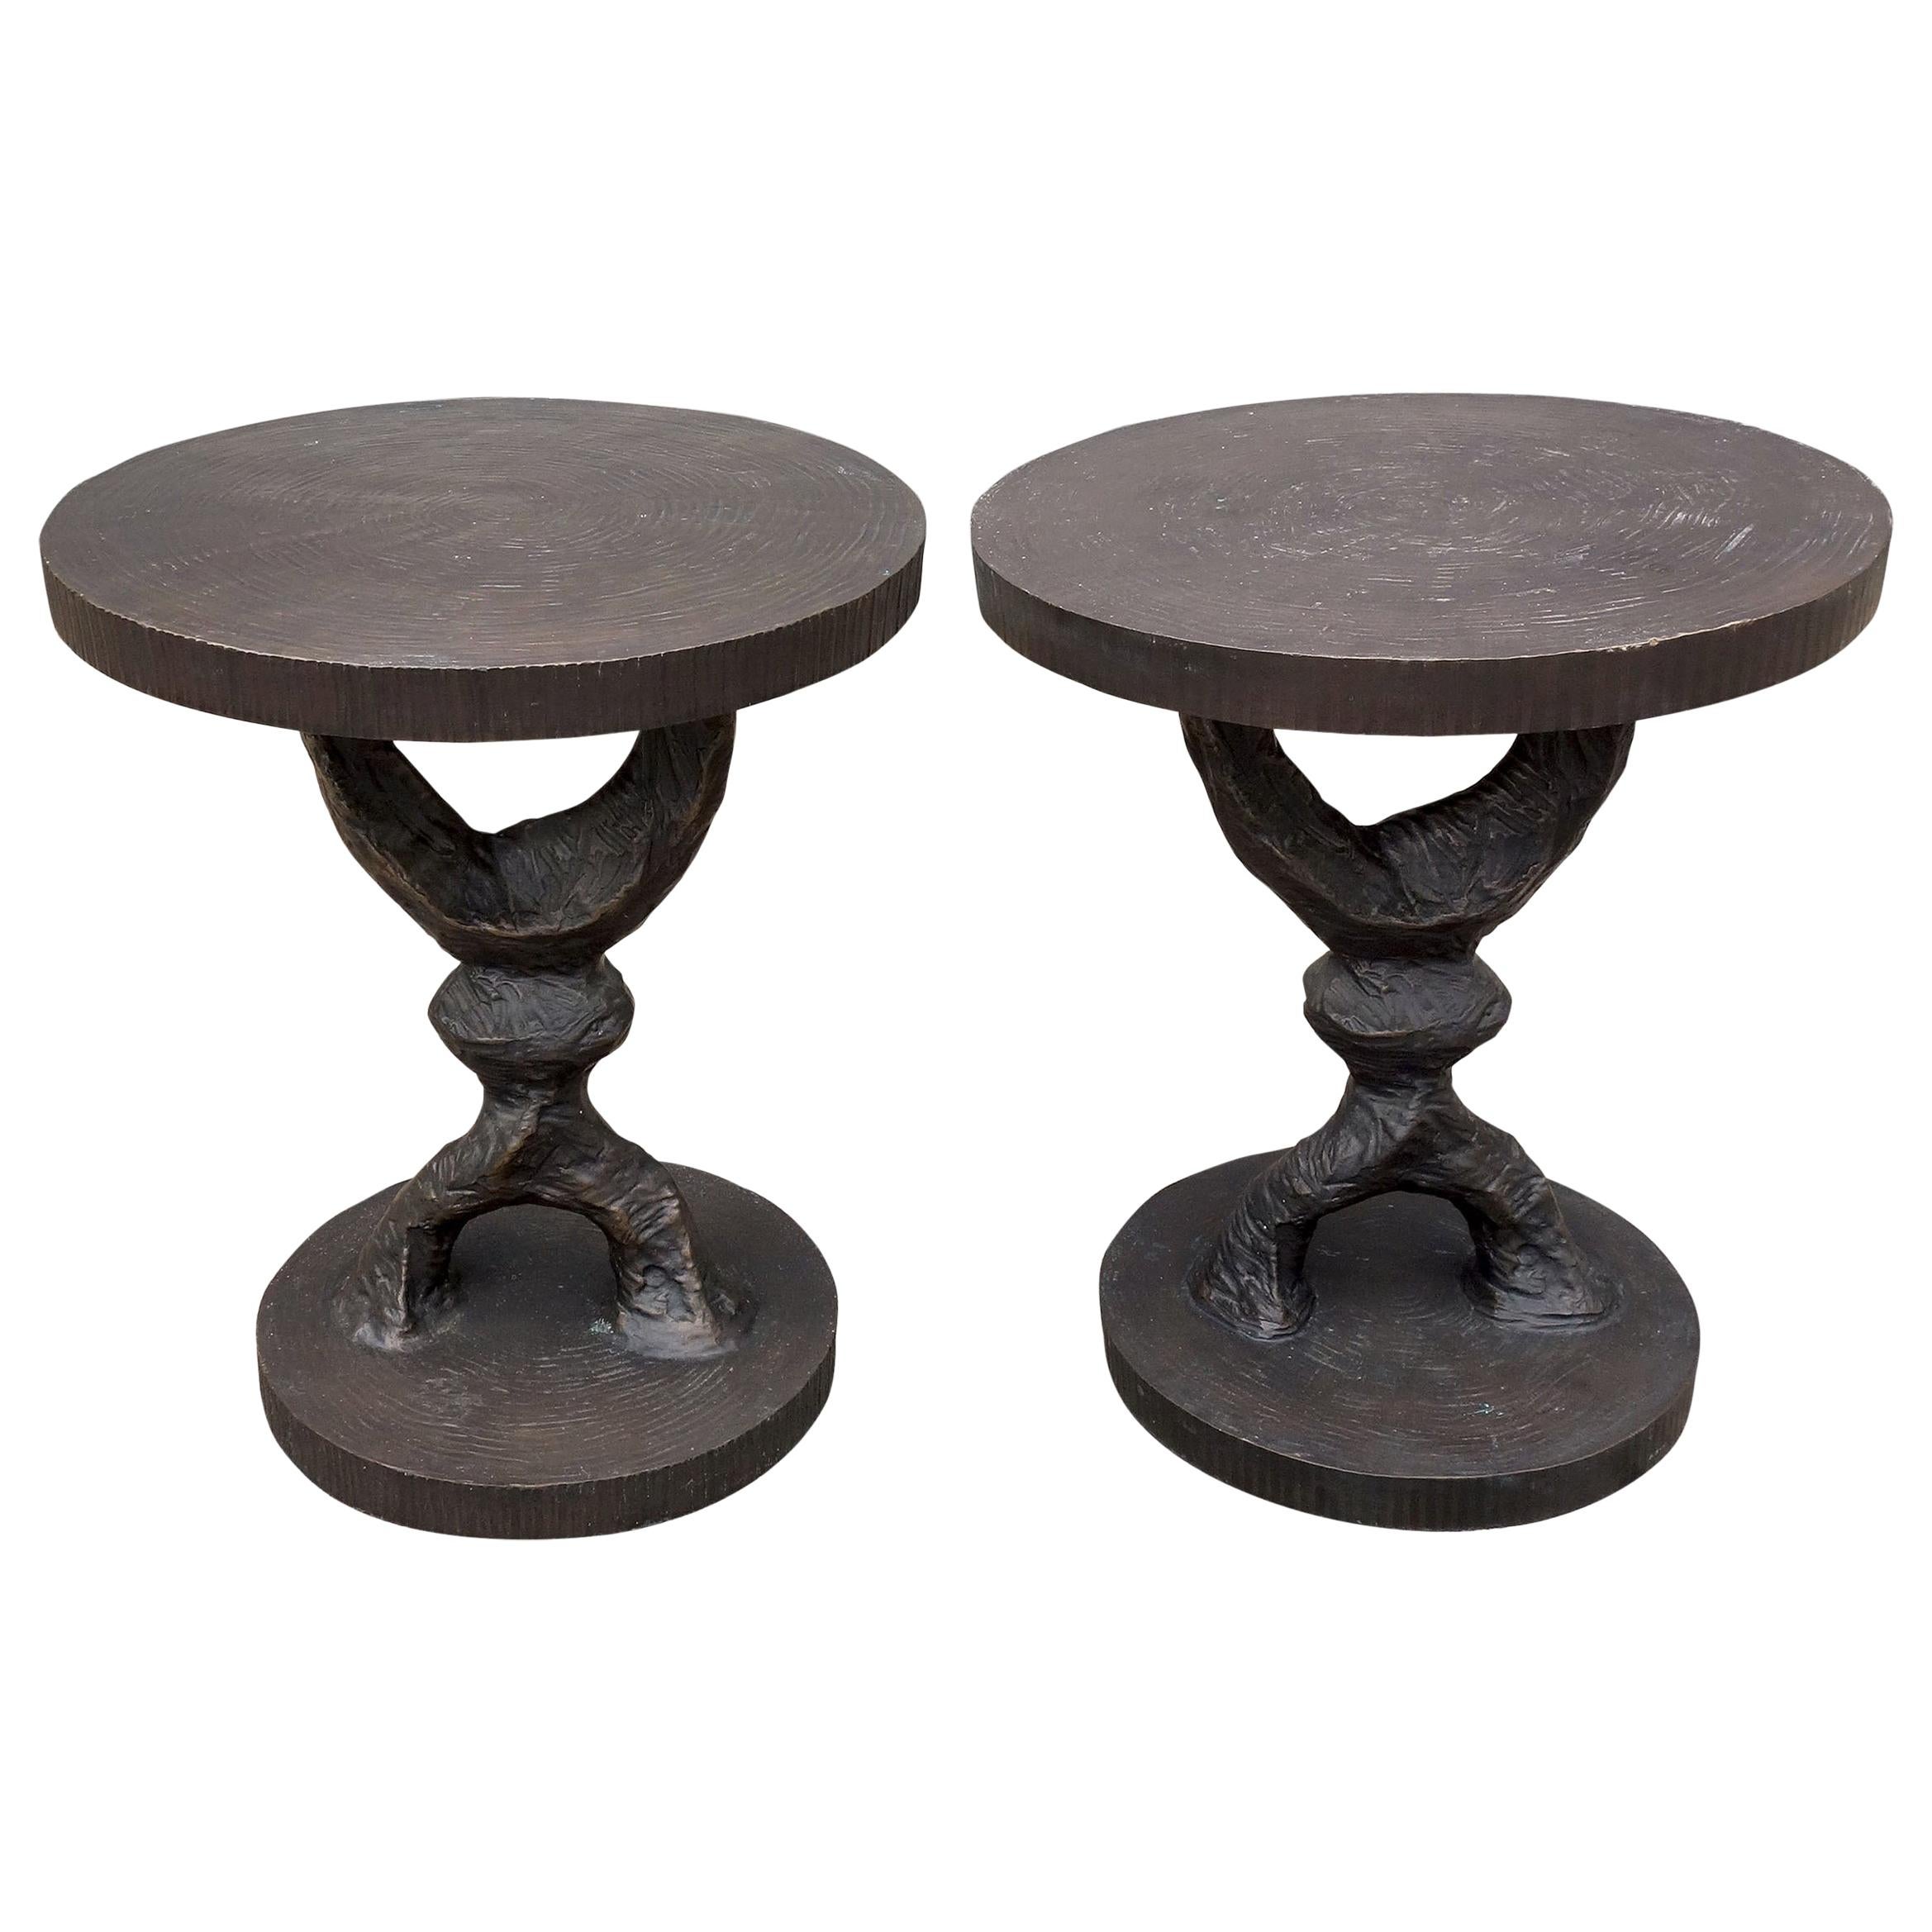 Pair of Corbin Crescent Side Tables